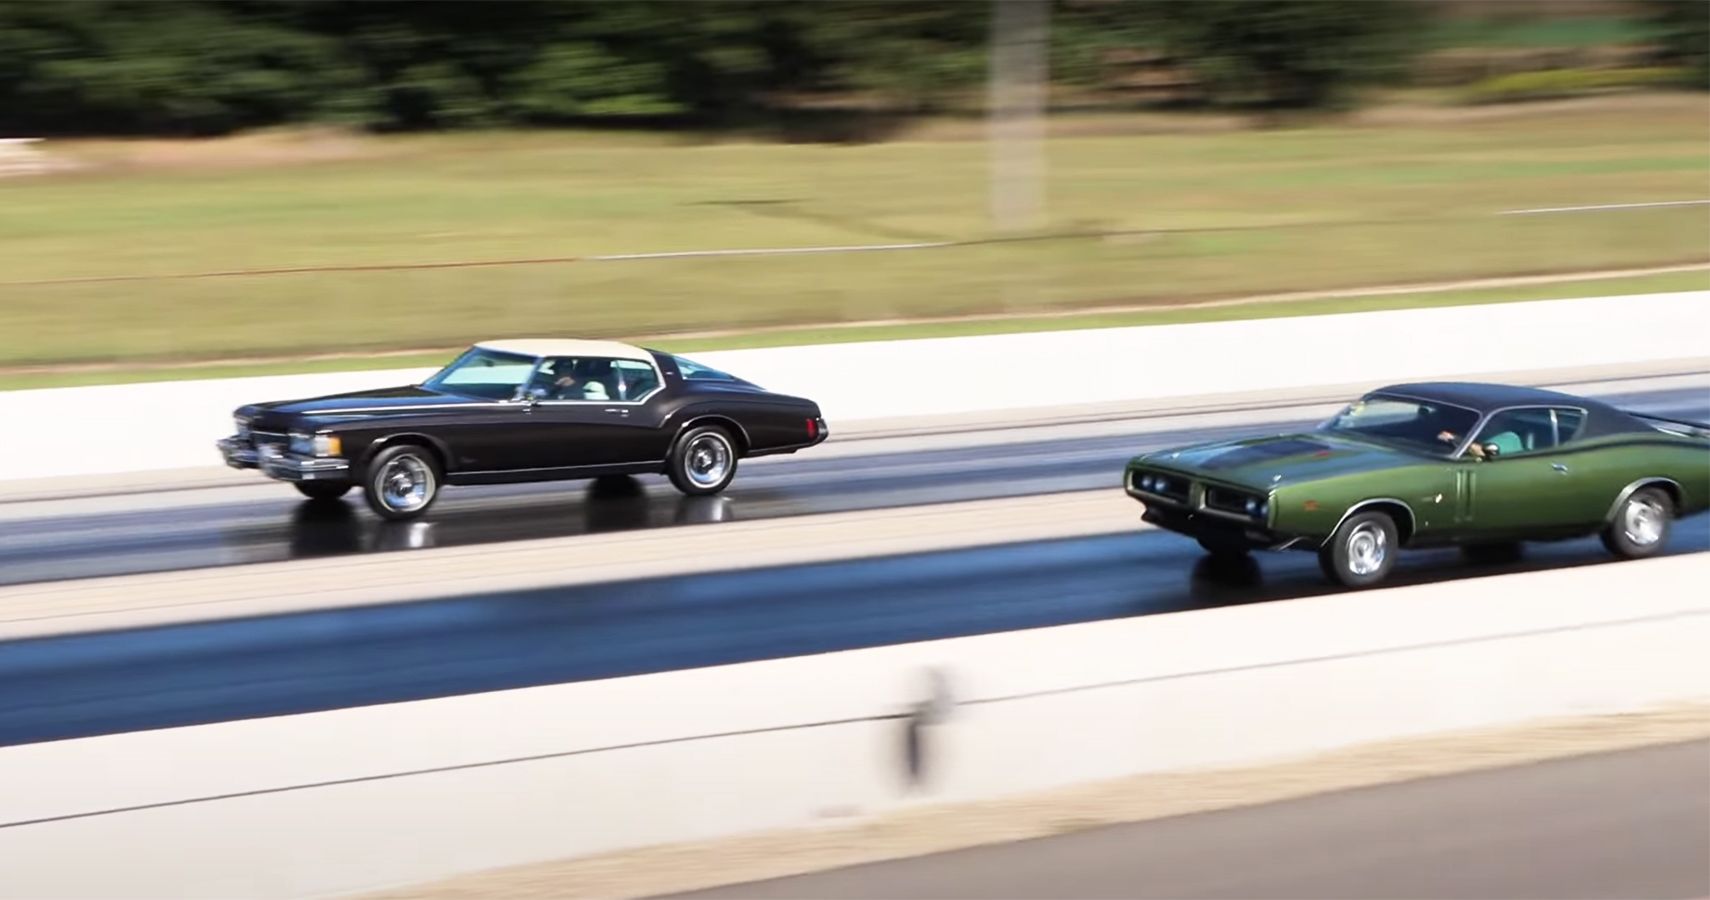 1973 Buick Riviera Stage 1 and 1971 Dodge Charger RT 440 drag race